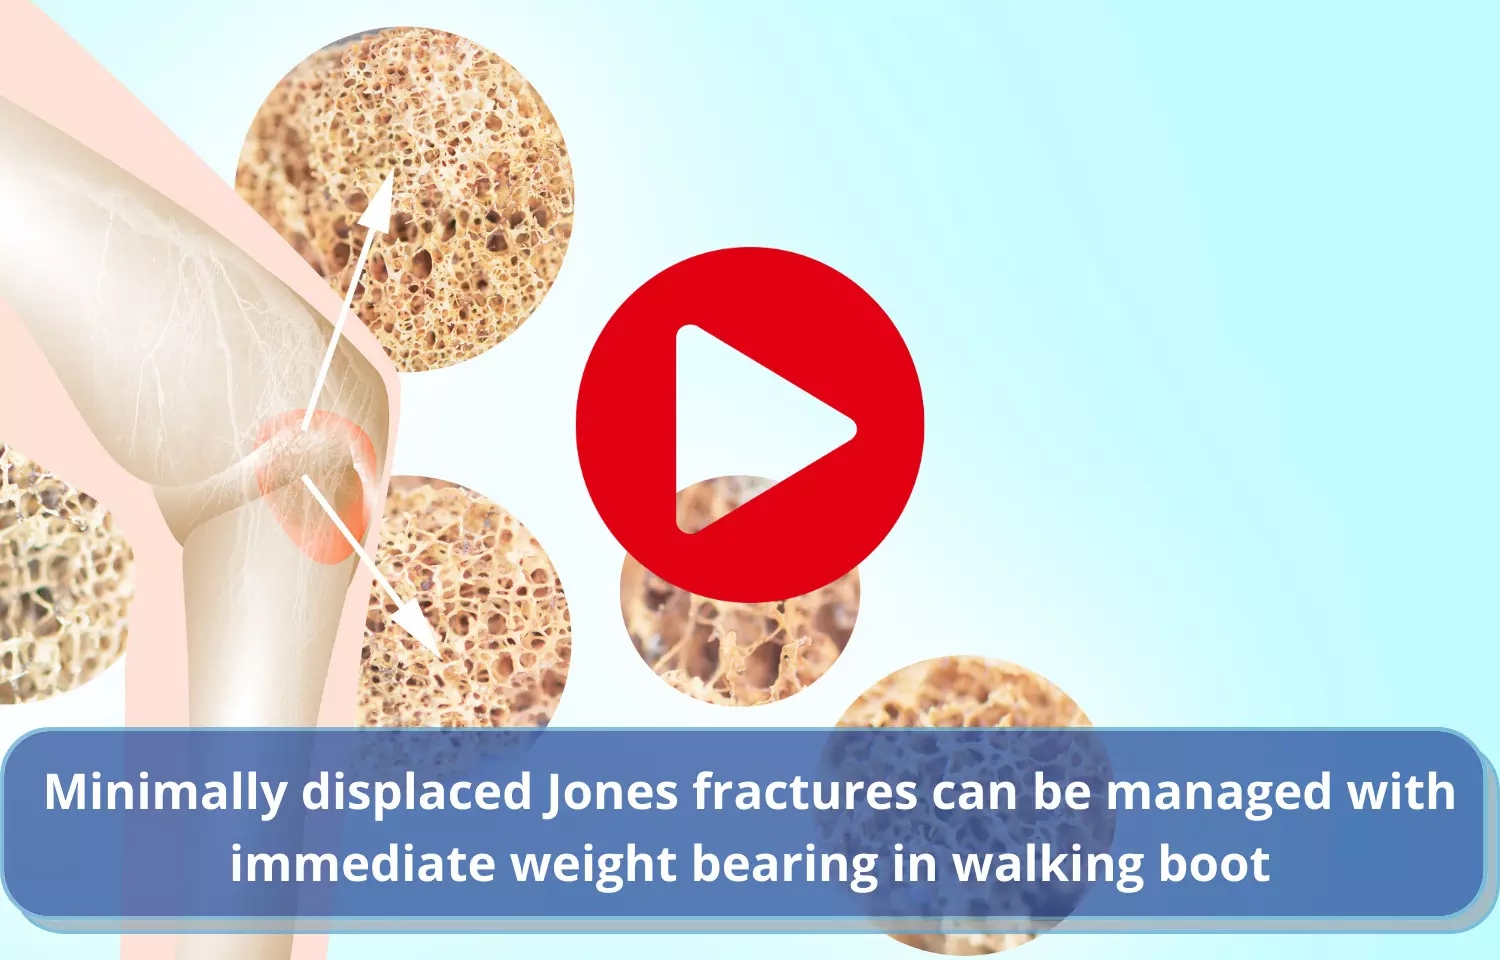 Minimally displaced Jones fractures to be managed with immediate weight bearing in walking boot